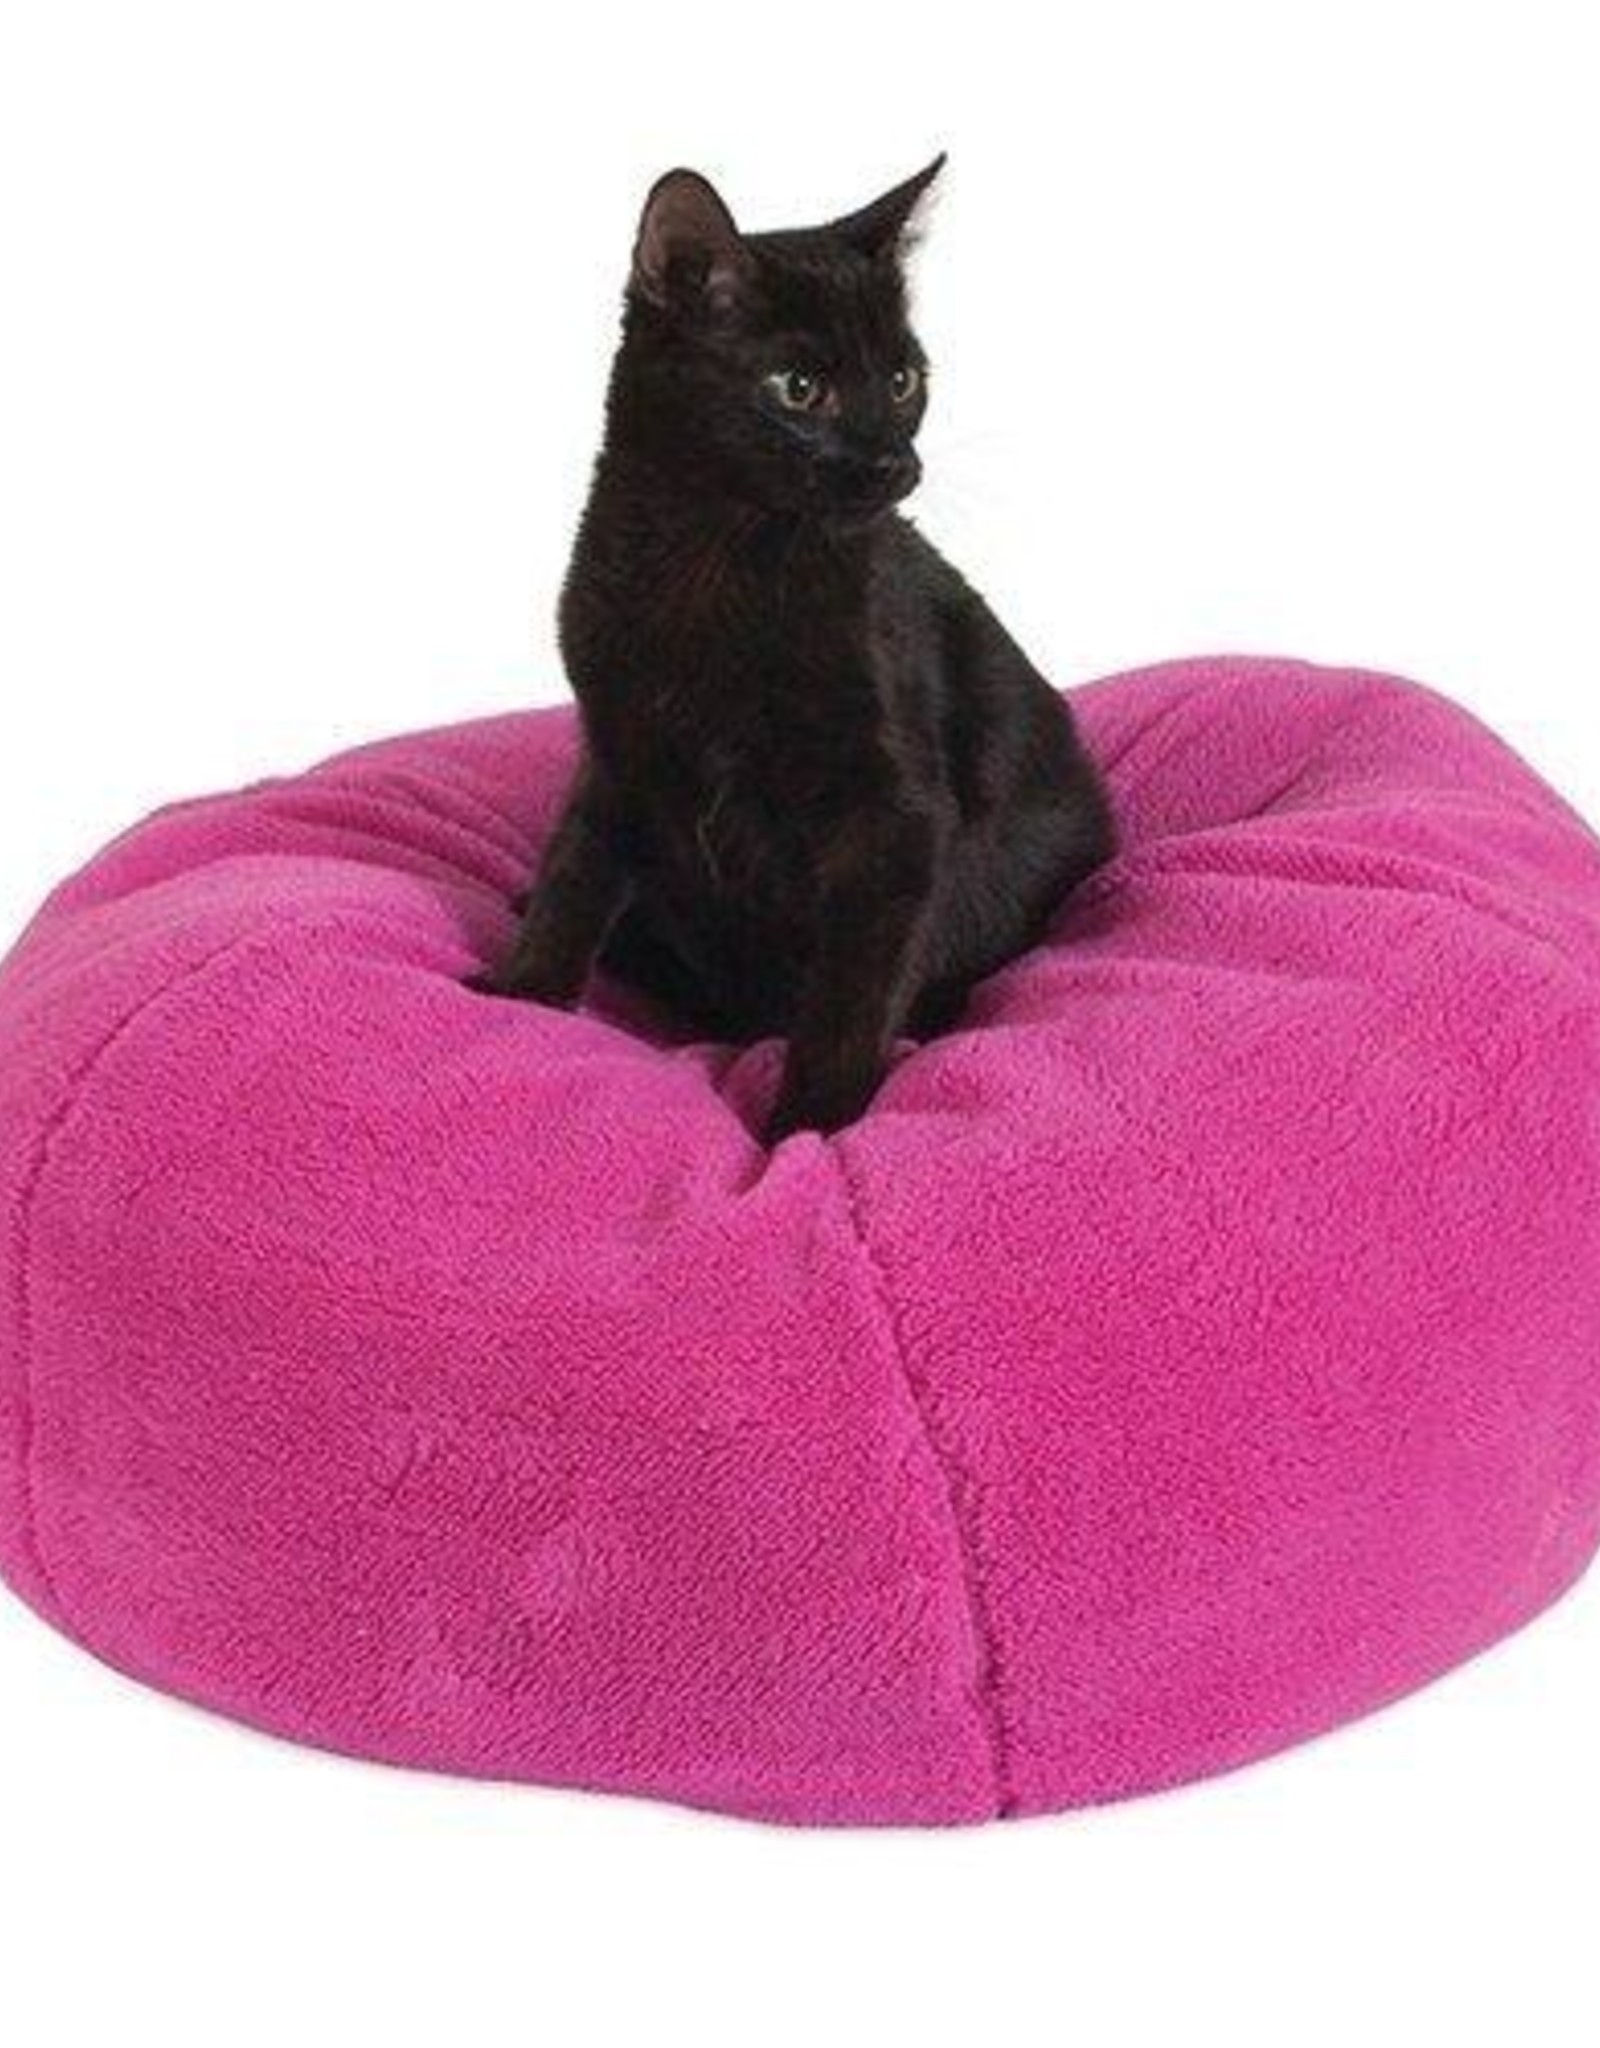 DOSKOCIL MANUFACTURING CO JACKSON GALAXY COMFY DUMPLING PET BED PINK 21IN